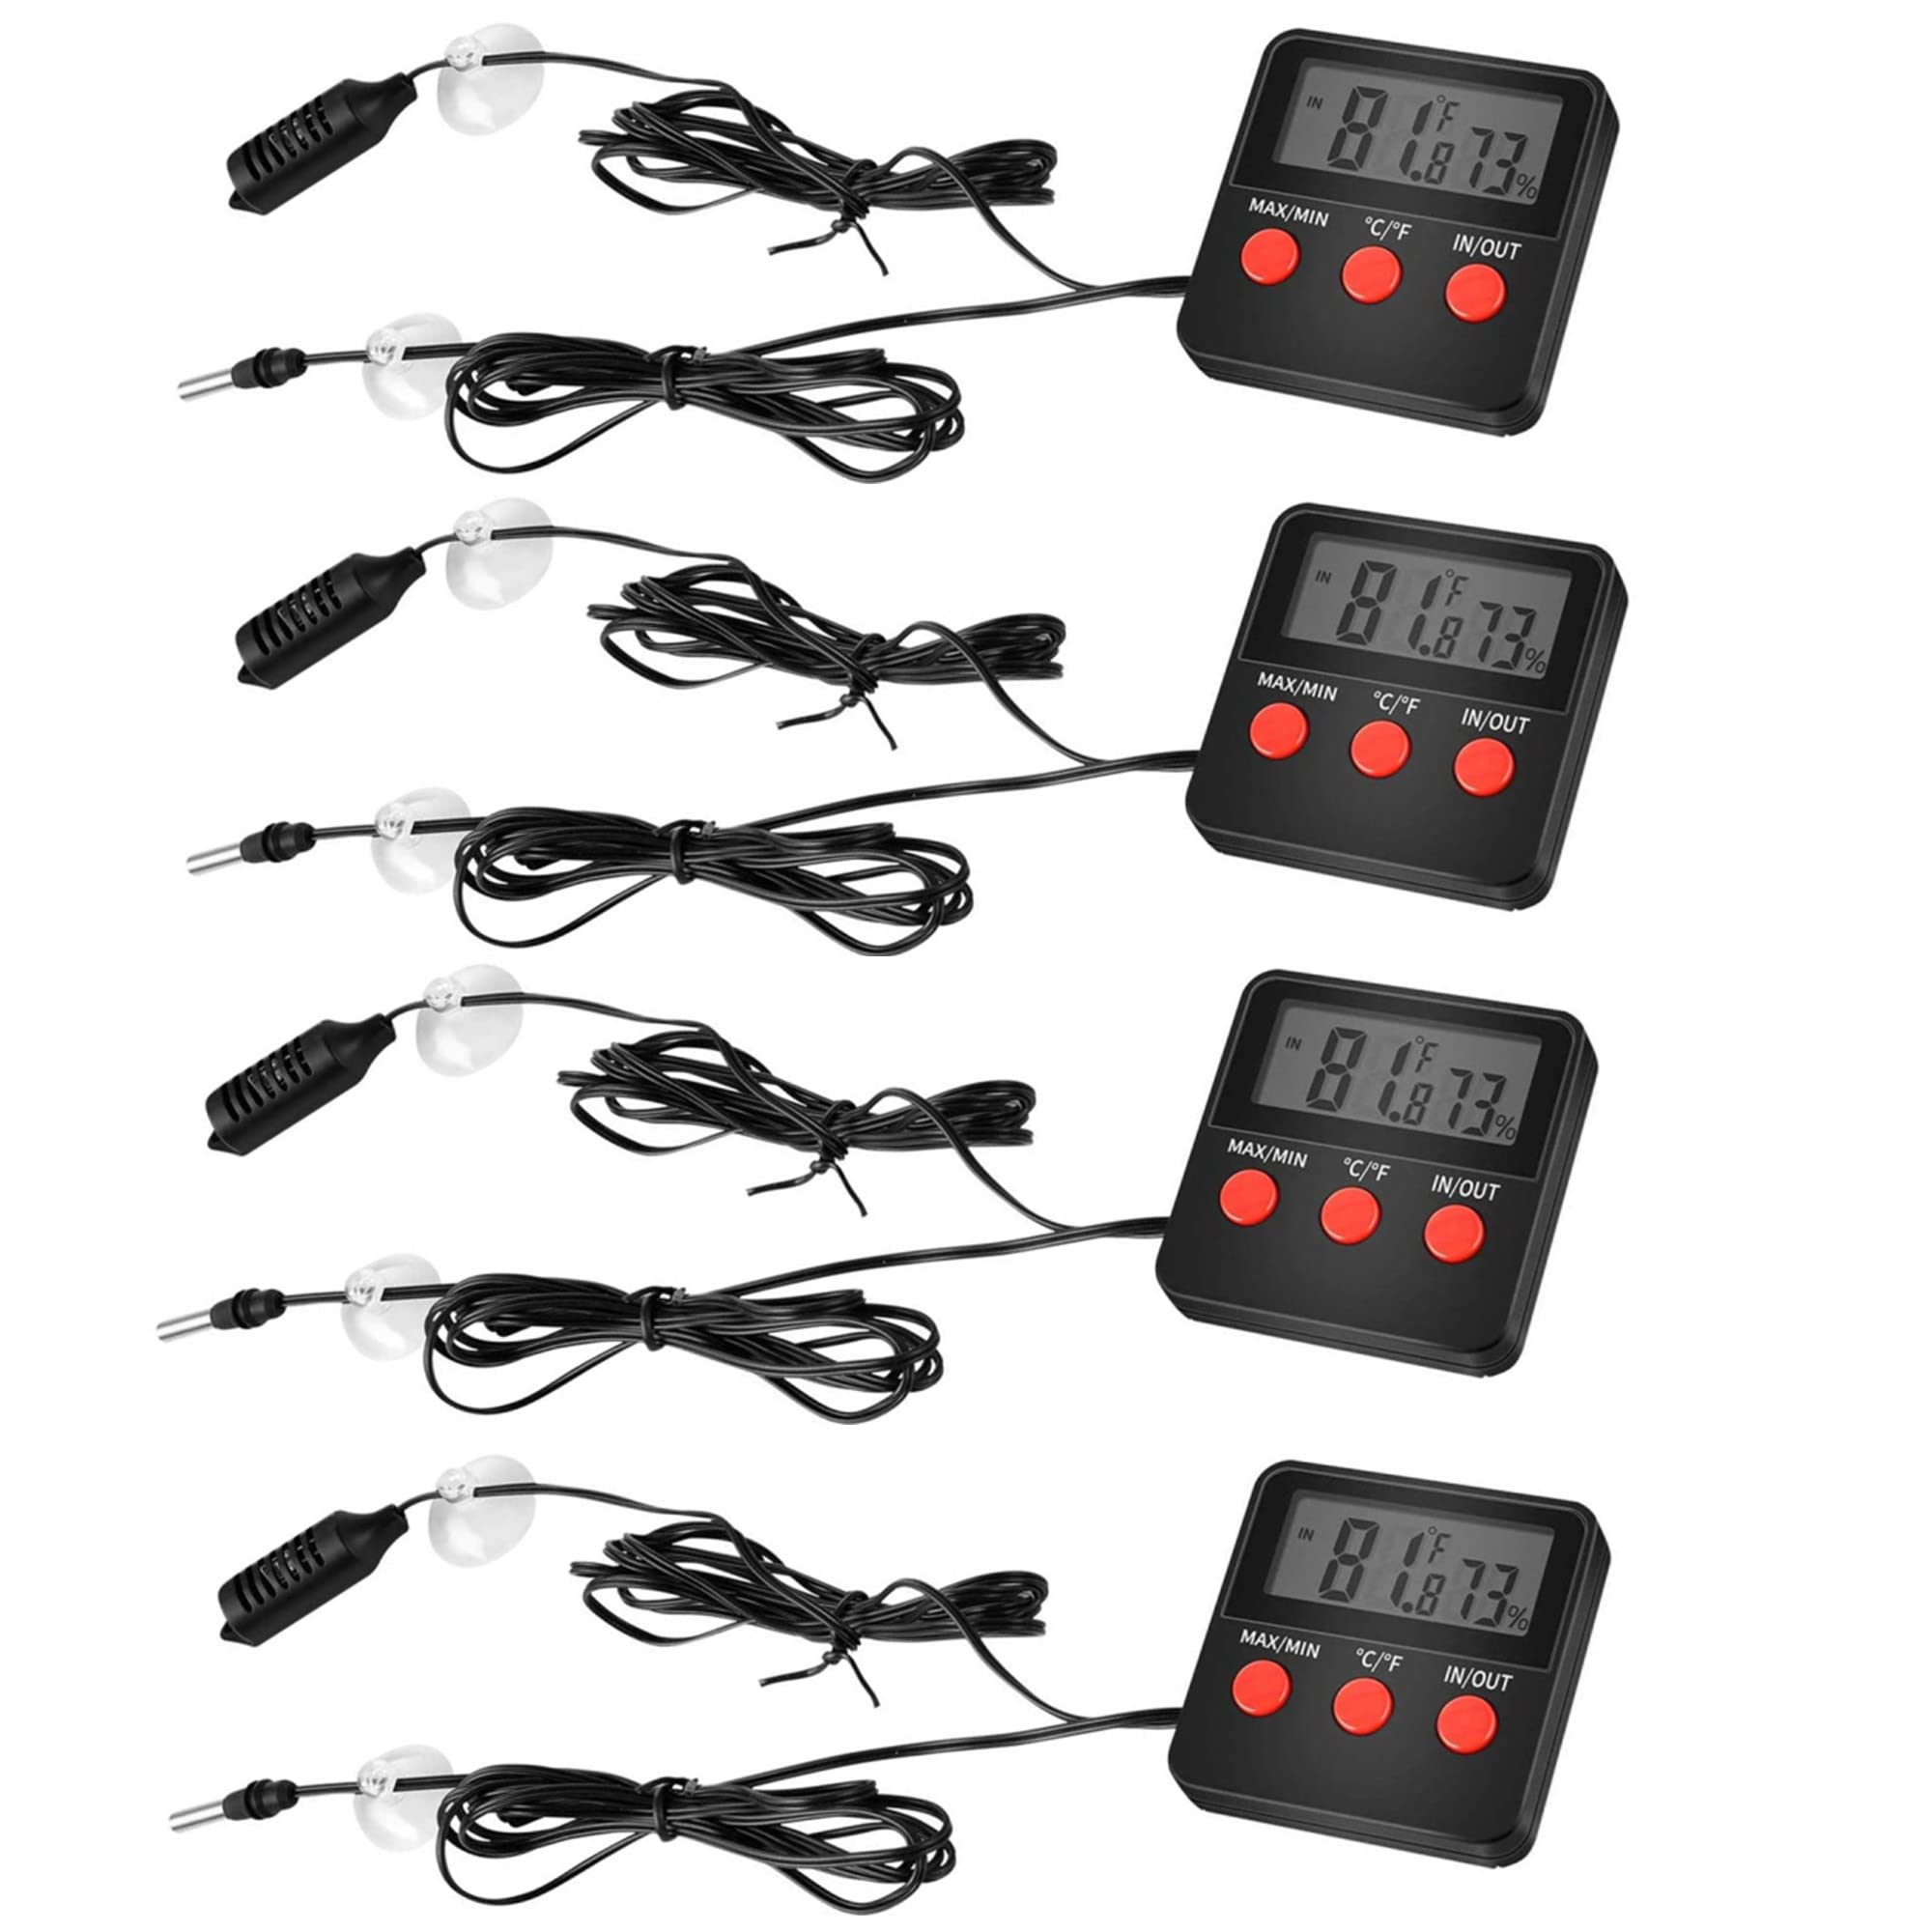  Reptile Thermometer Humidity and Temperature Sensor Gauges  Reptile Digital Thermometer Digital Reptile Tank Thermometer Hygrometer  with Hook Ideal for Reptile Tanks, Terrariums : Pet Supplies